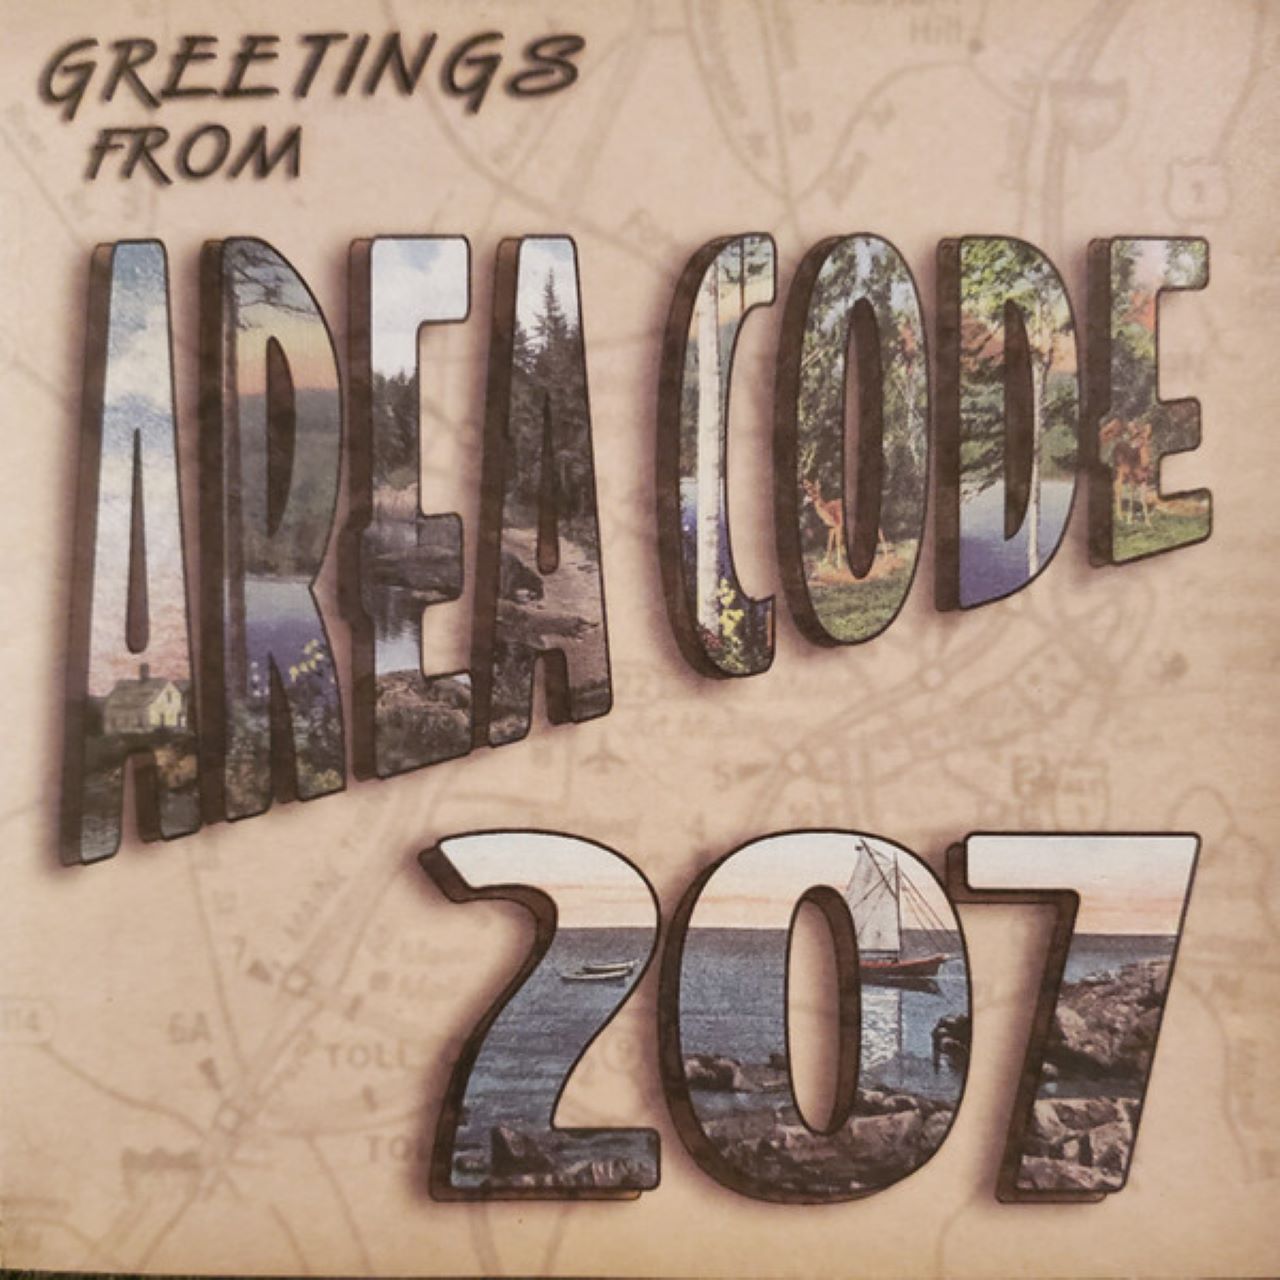 A.A.V.V. - Greetings From Area Code 207 cover album